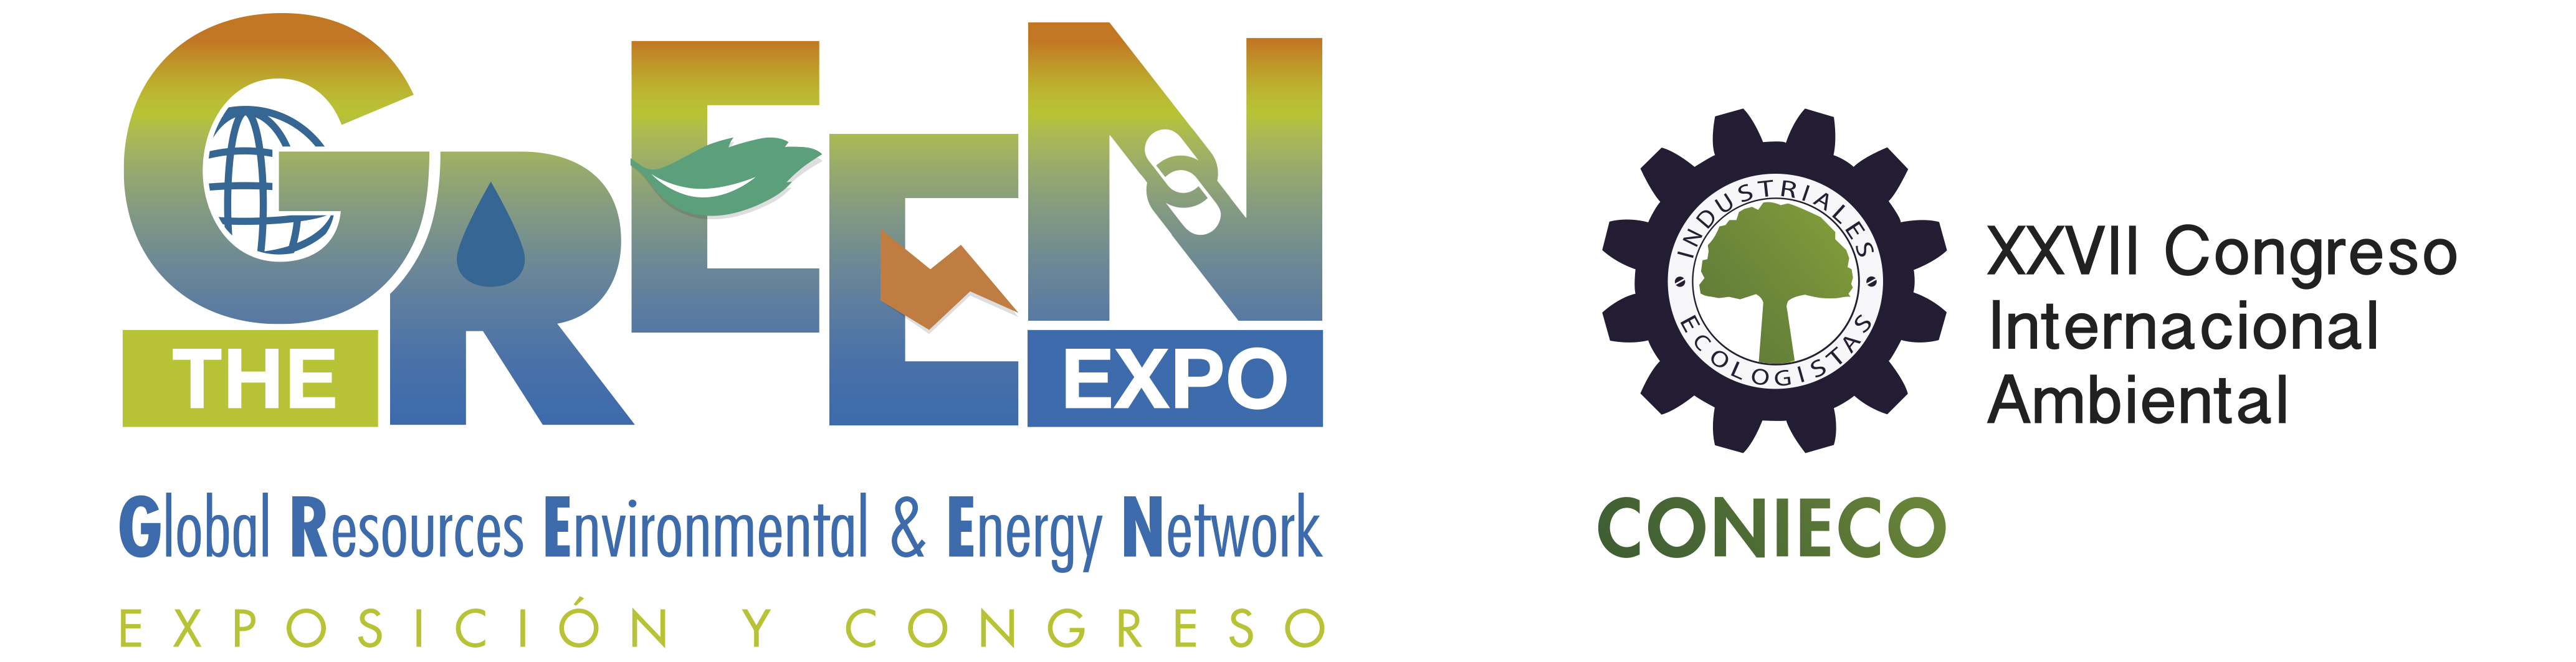 The Green Expo